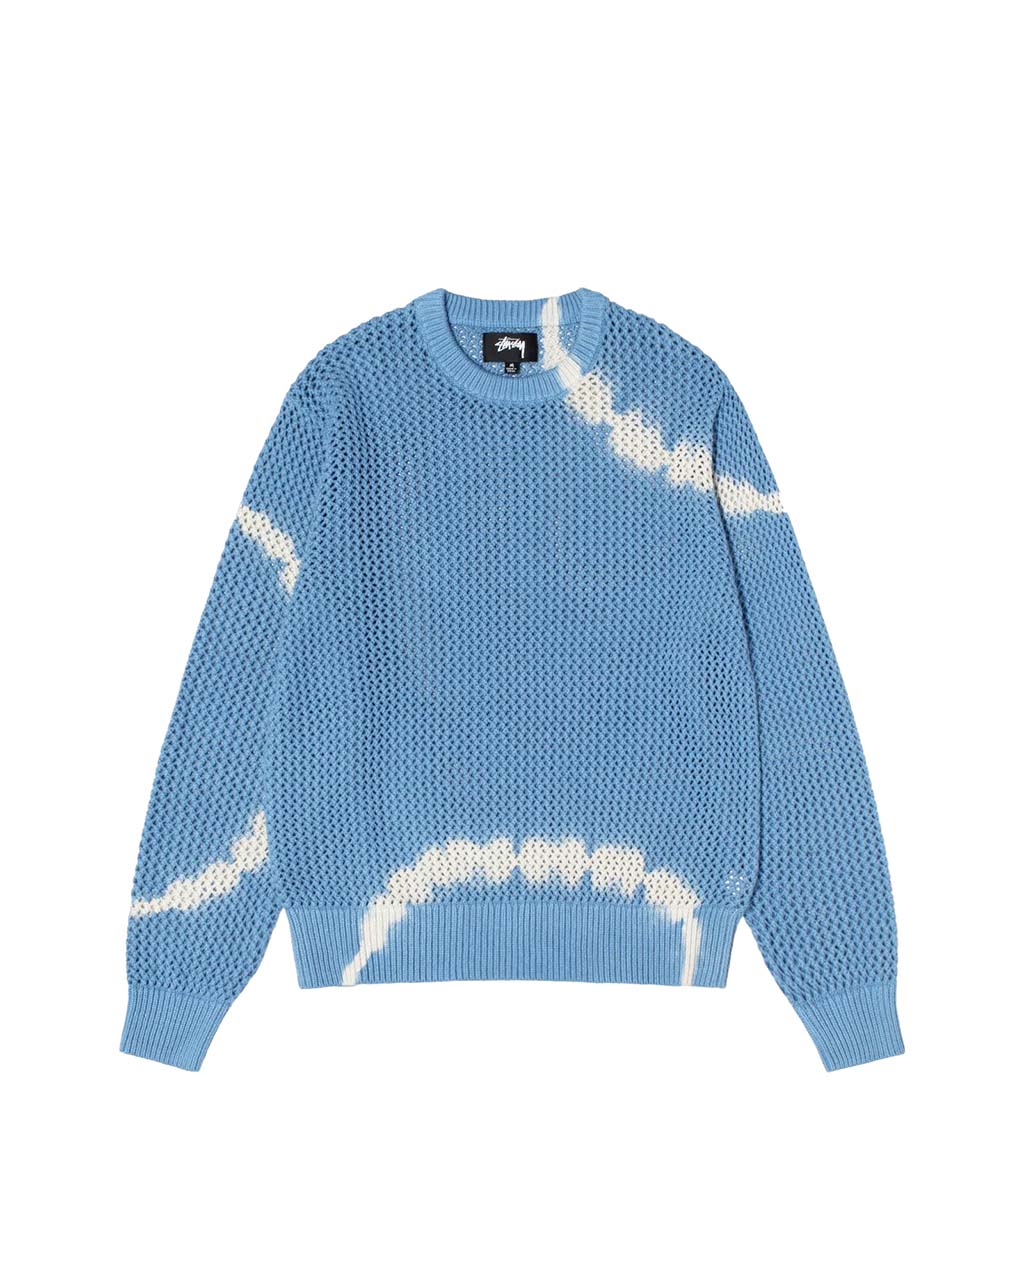 Stüssy Pigment Dyed Loose Gauge Sweater